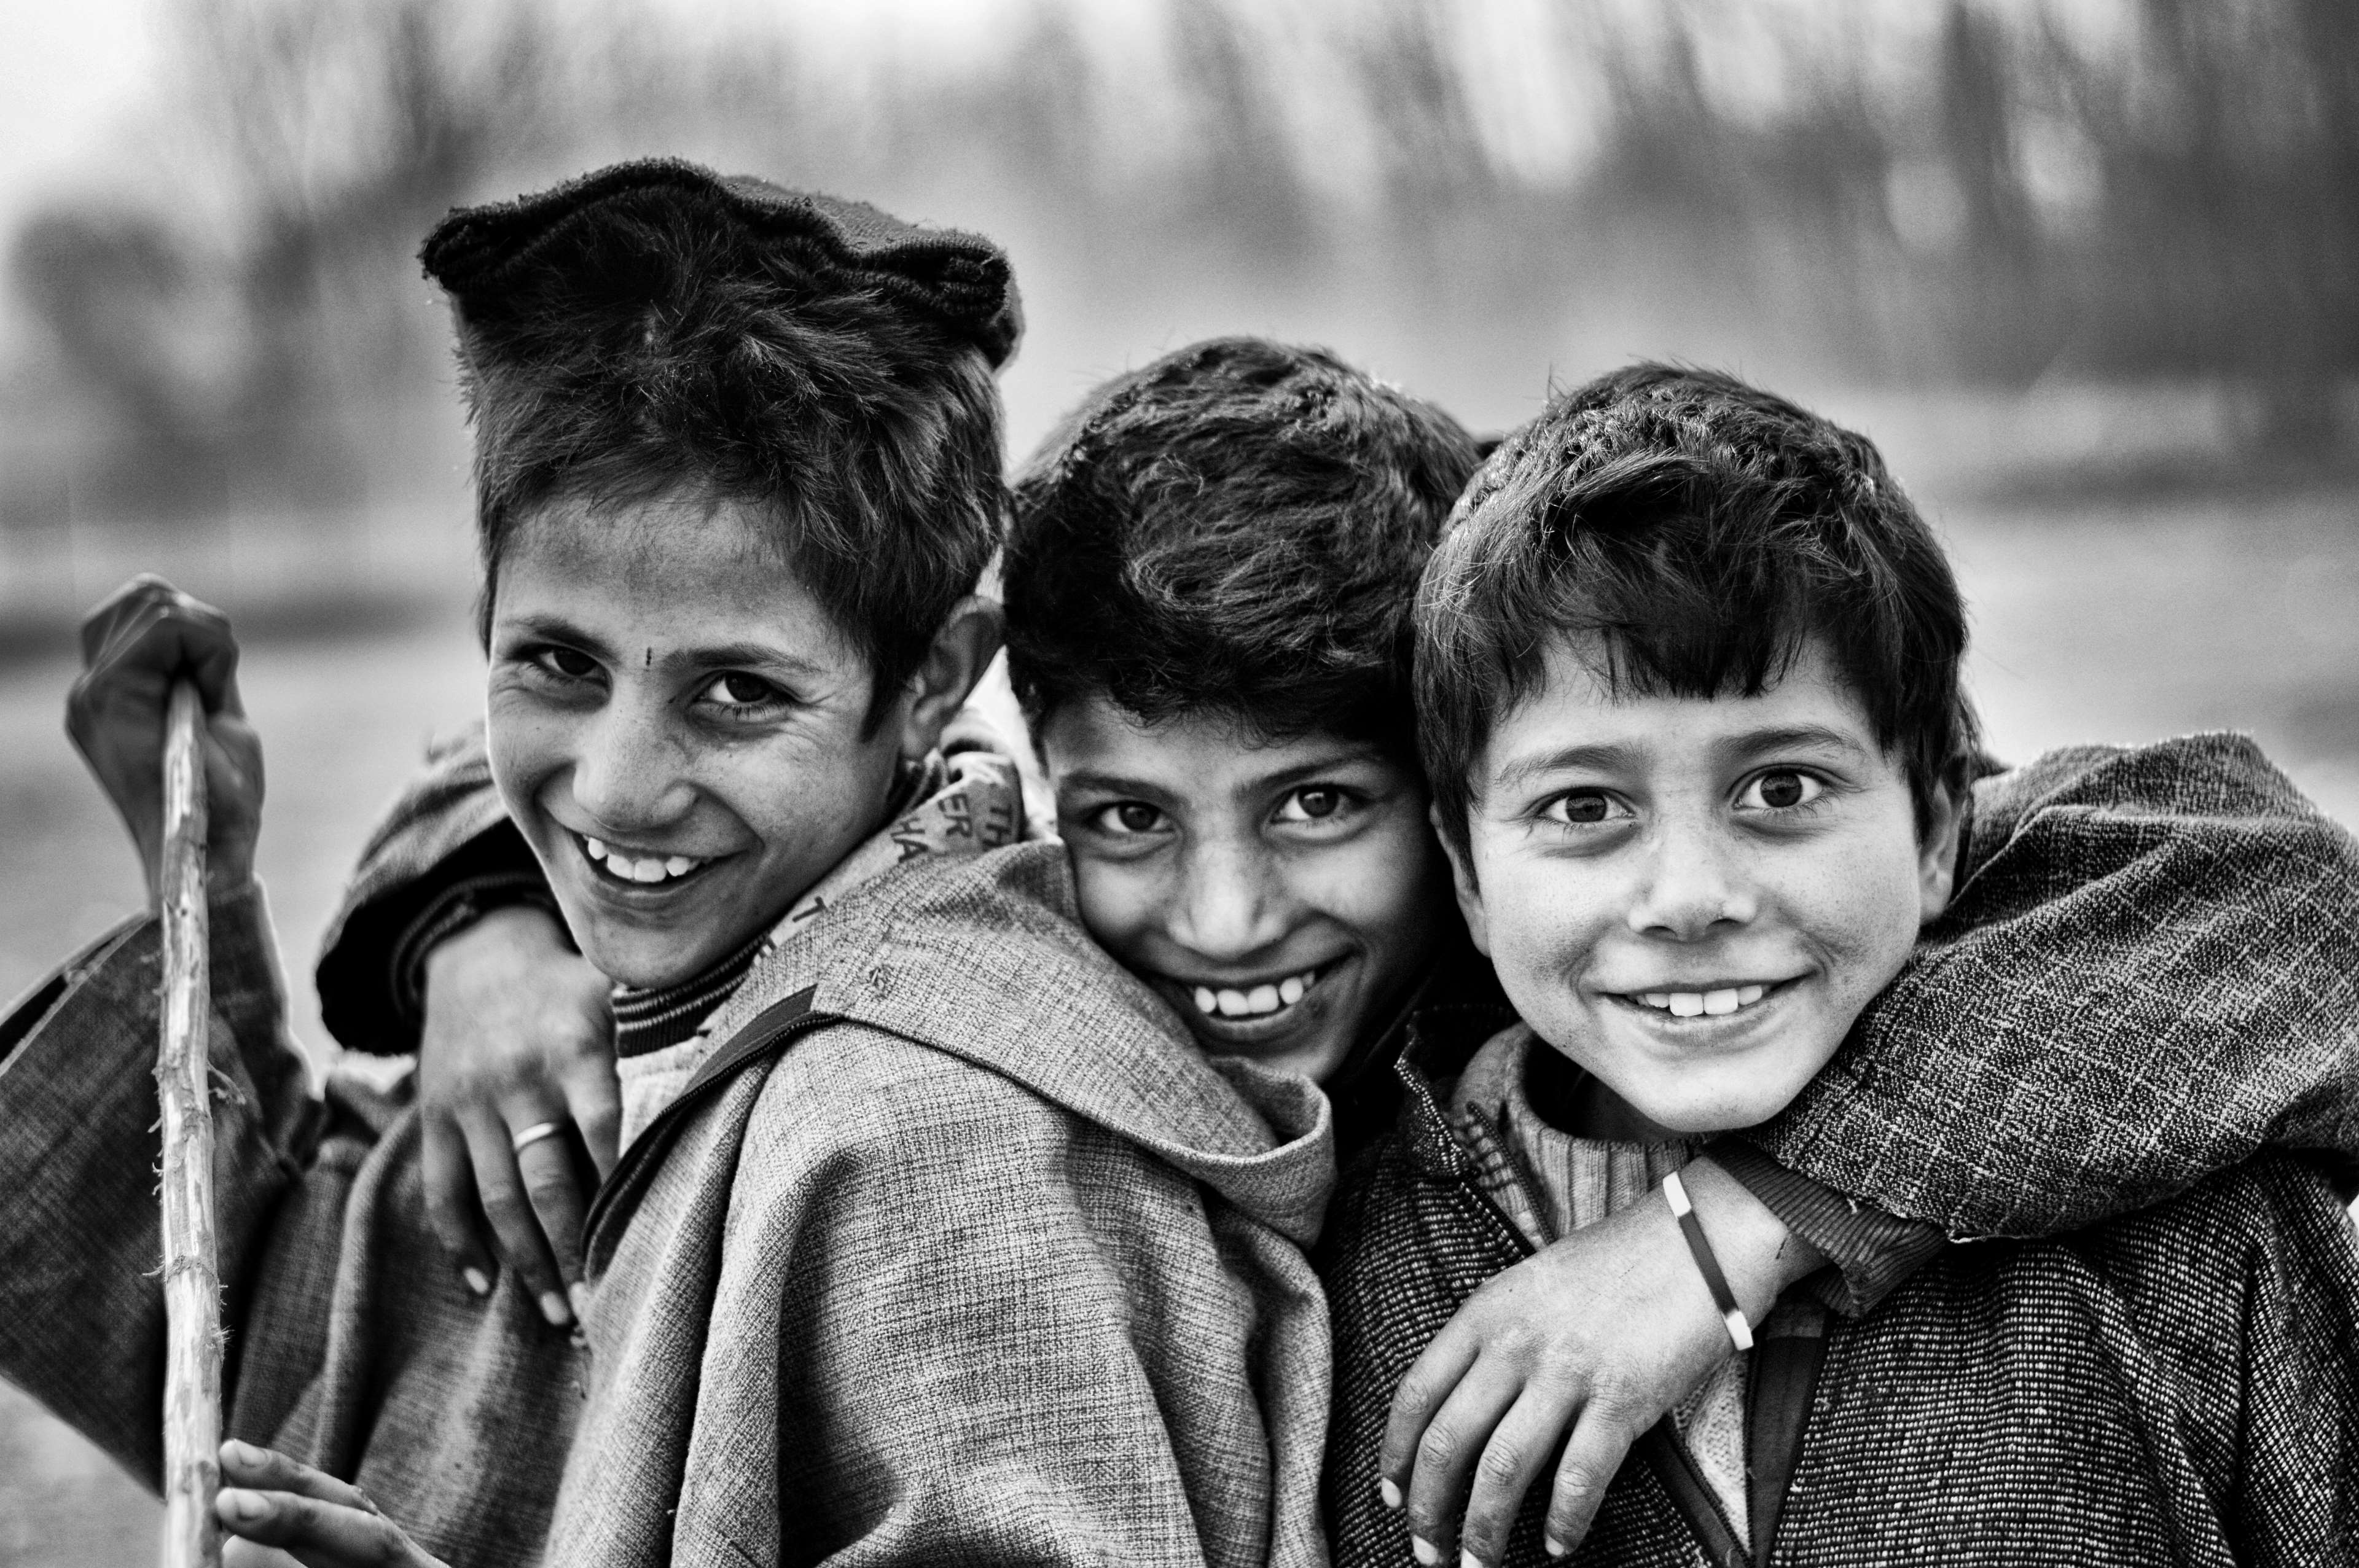 black and white, boys, childhood, climate, clothes, eyes, face, friends, hugging, kids, laughing, party, portrait, smiley, smiling, teeth, village, winter 4k wallpaper. Mocah HD Wallpaper